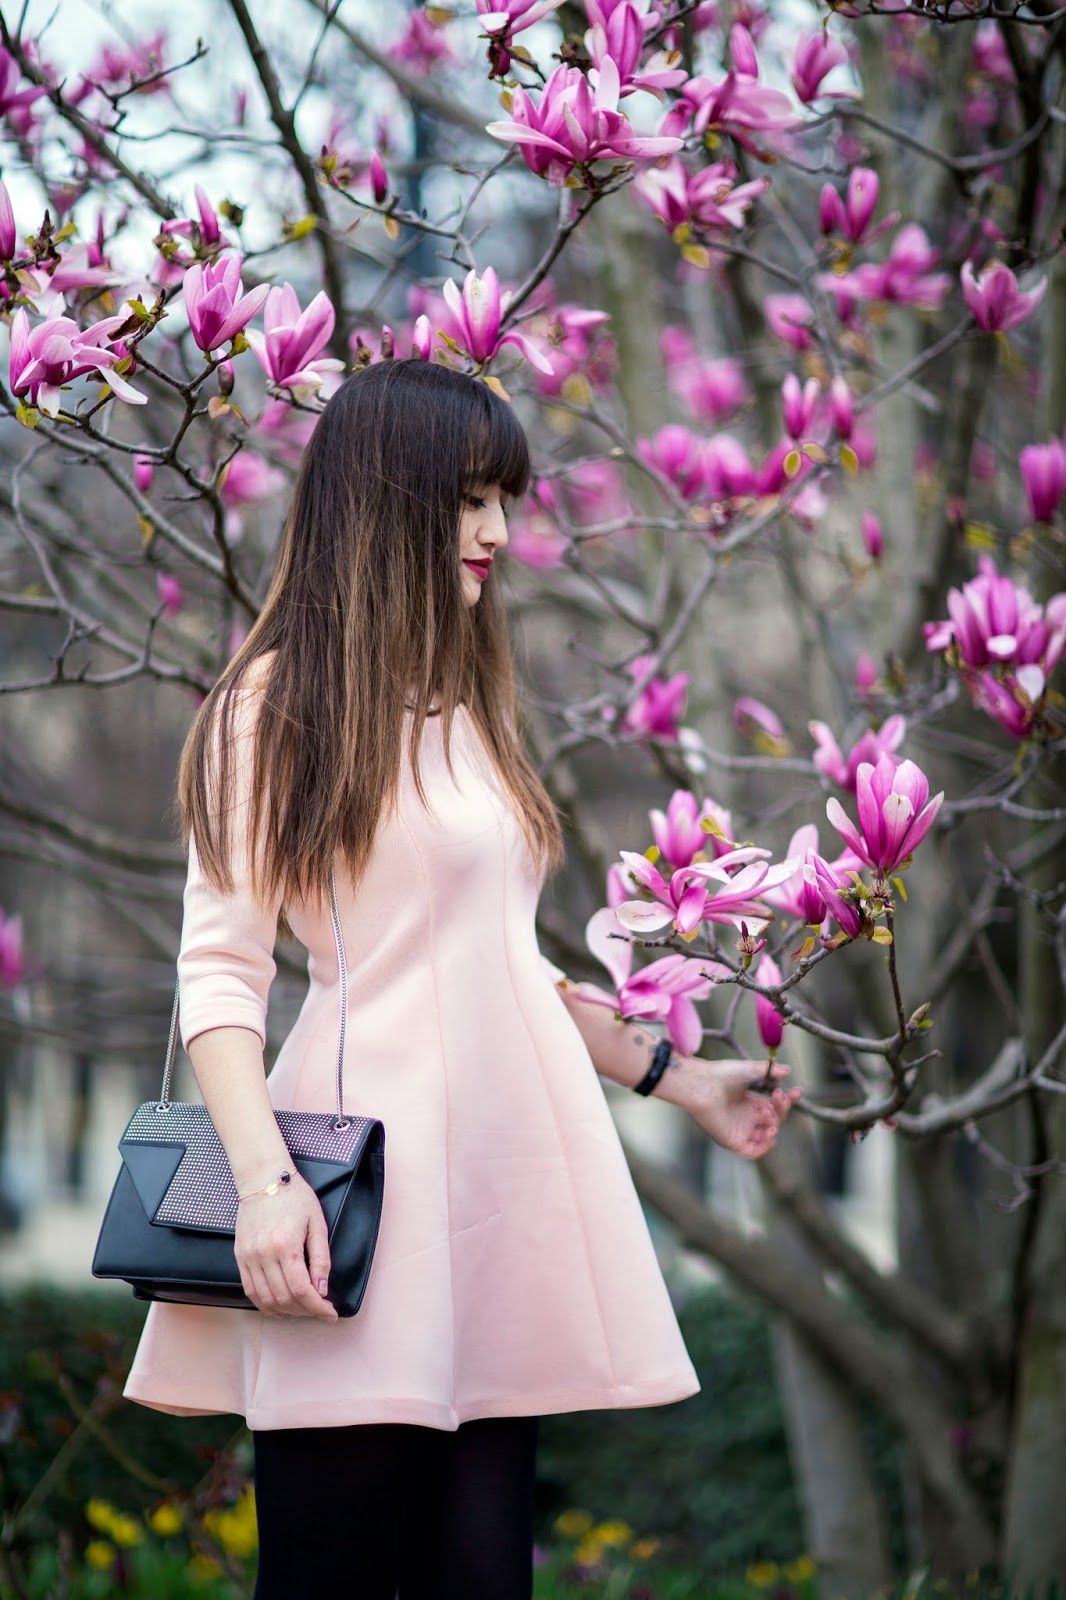 meet me in paree, blogger, fashion, look, style, pink, fashion photography, look, chic style